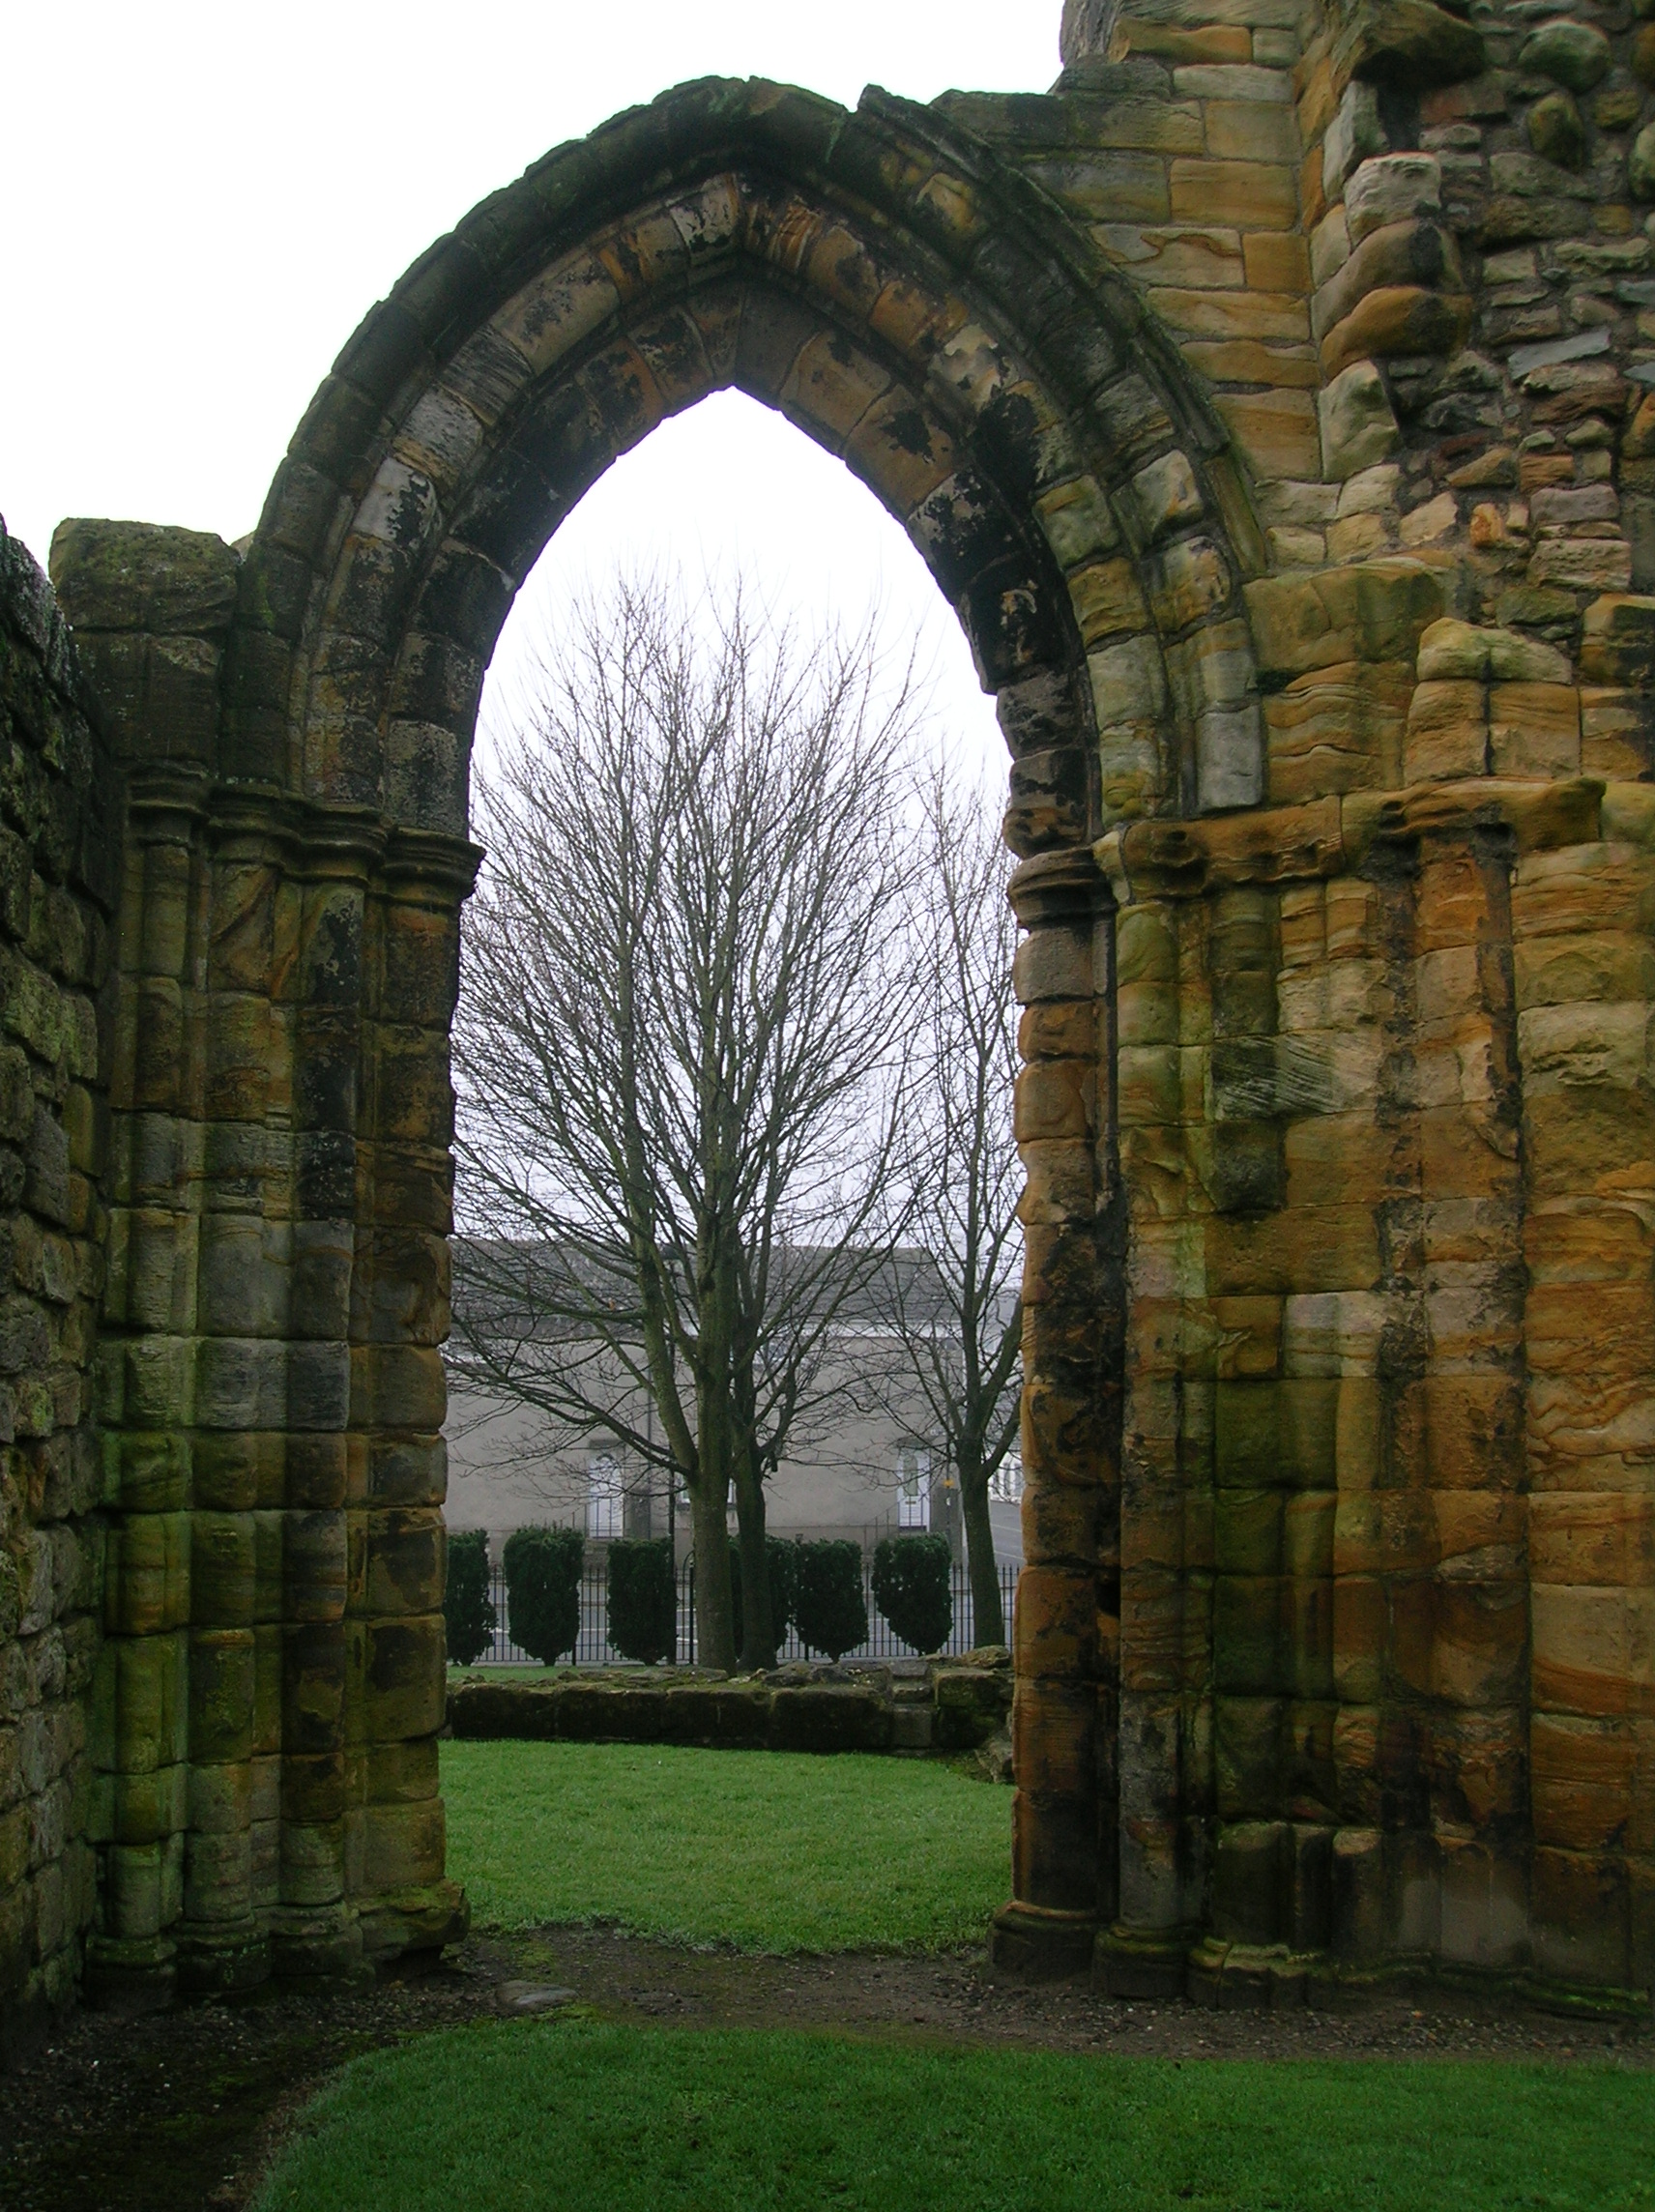 File:Kilwinning old tower archway.JPG - Wikimedia Commons